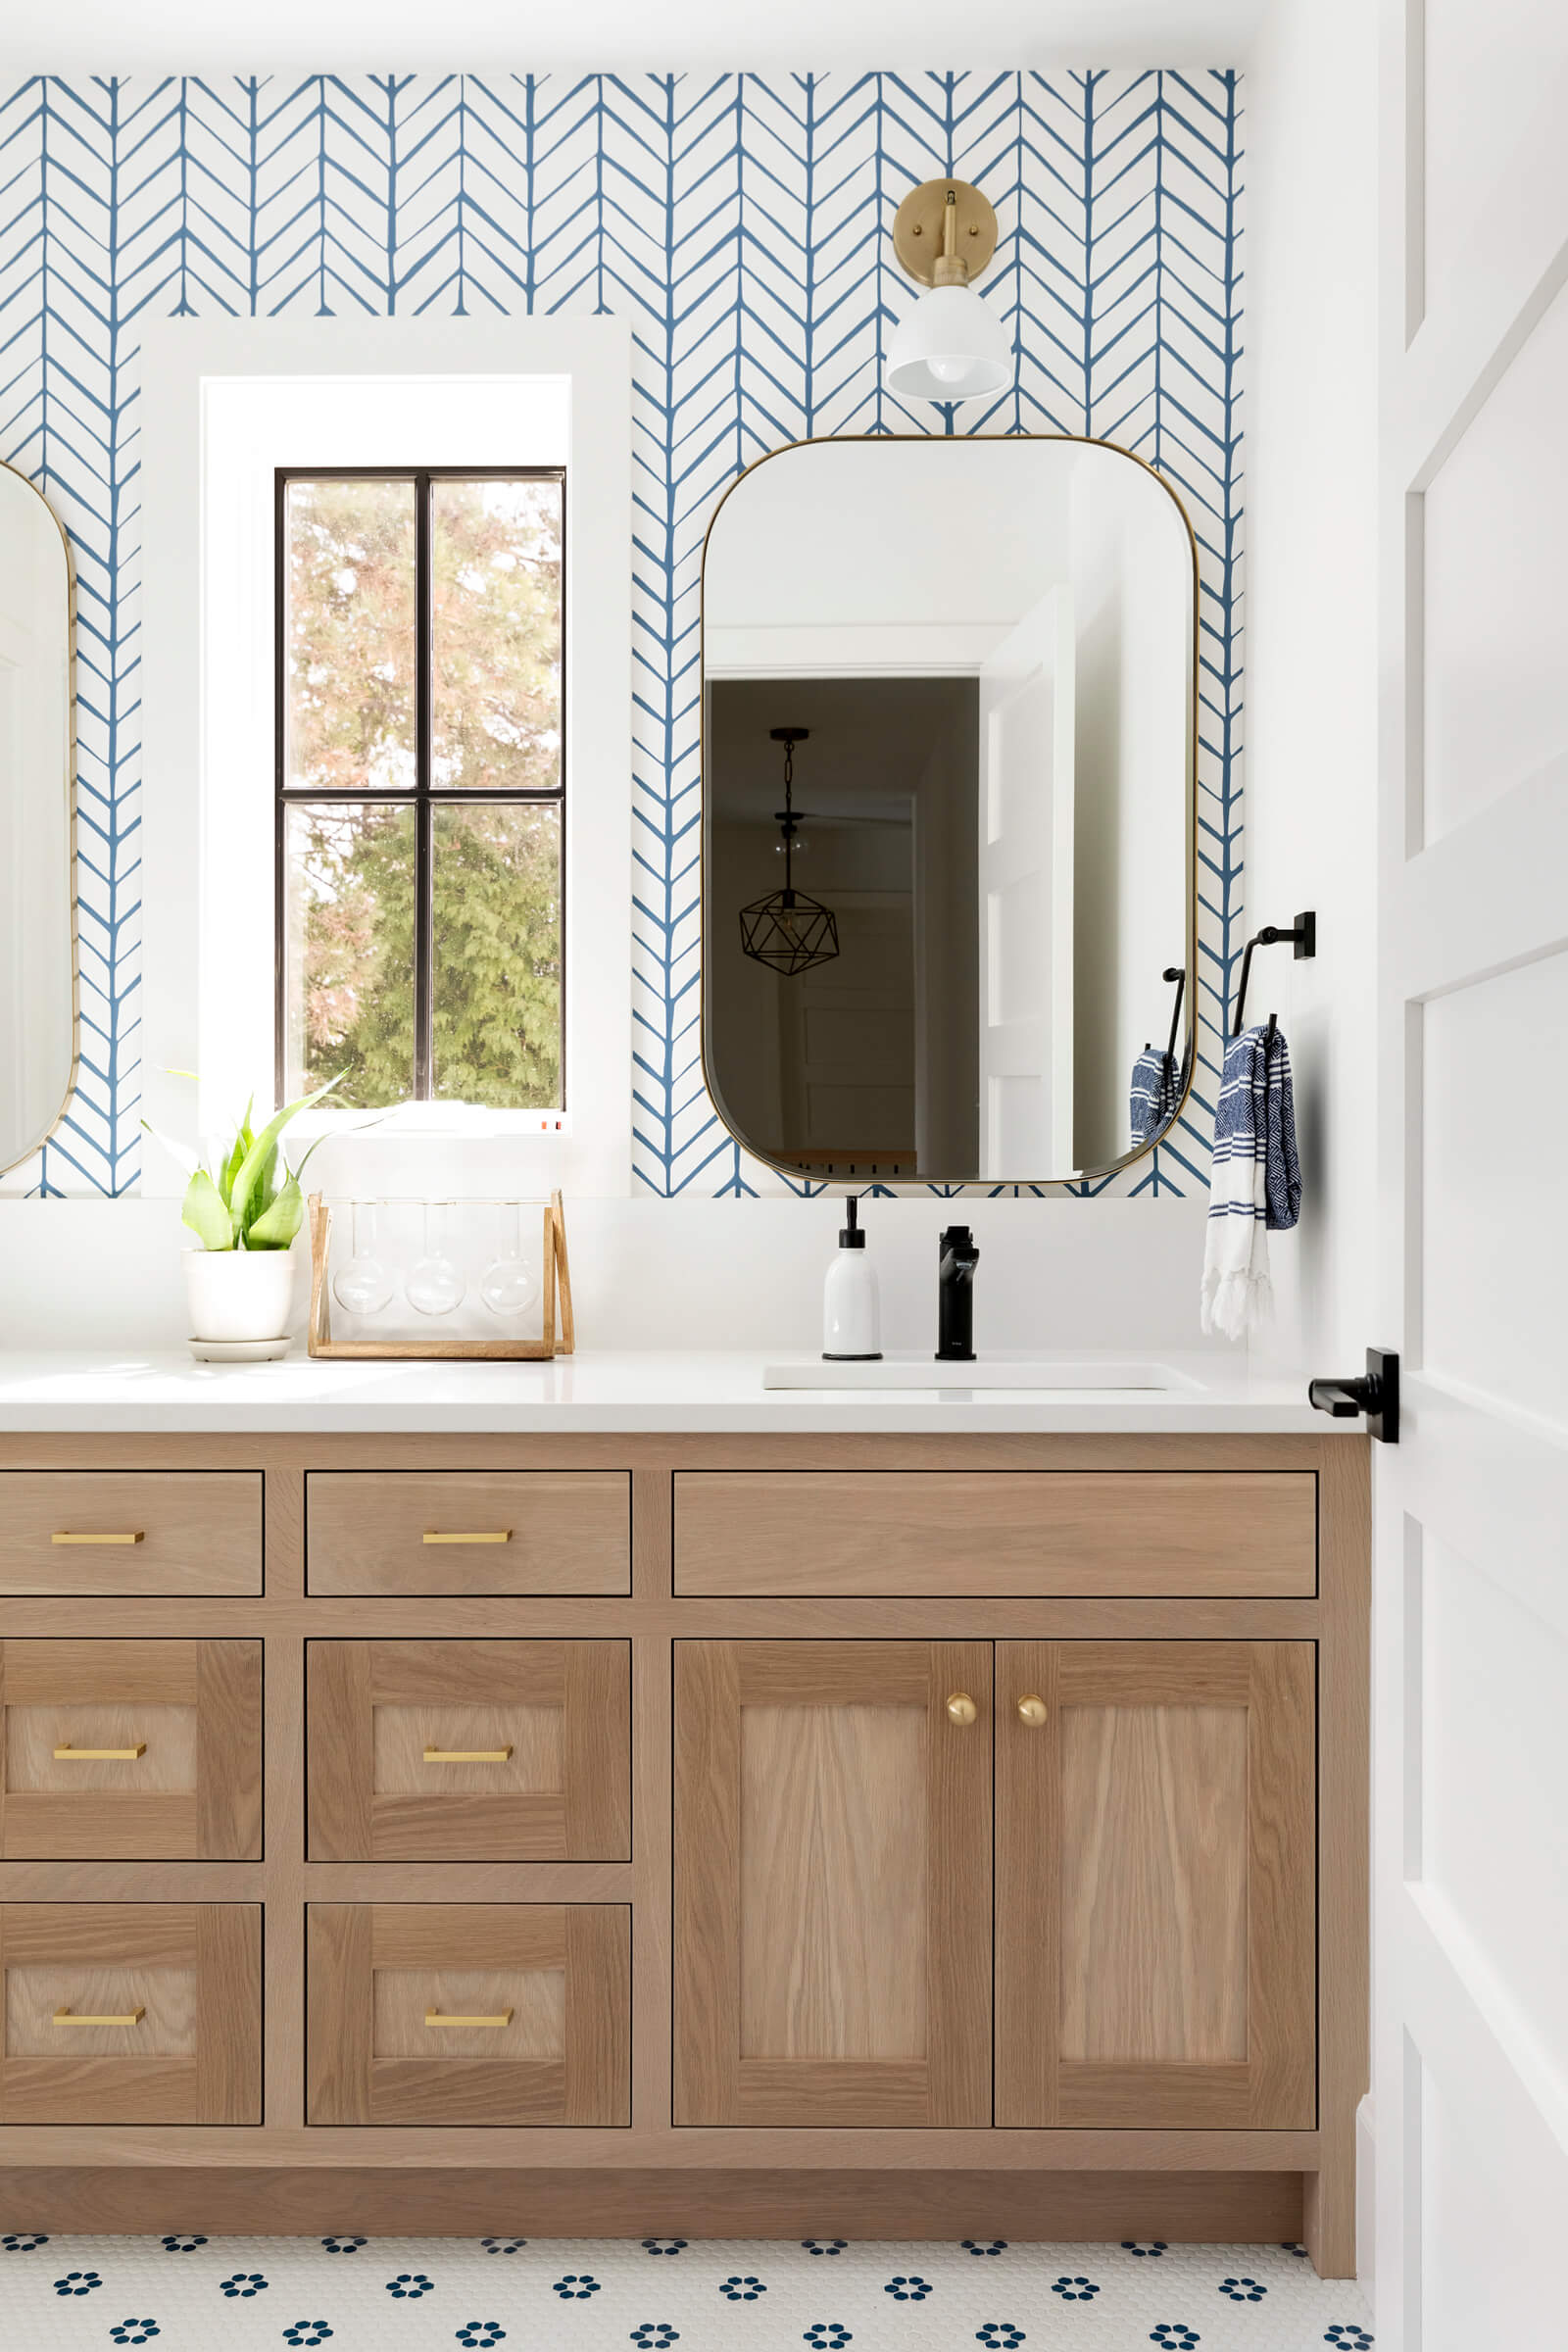 Bathroom remodels are a big investment in your home and a commitment to design. Most of the selections are "hard" finishes, permanently installed, and not as easily changed out. Choosing plumbing fixtures, tile, lighting, and accessories are big considerations for the overall design of a bathroom.